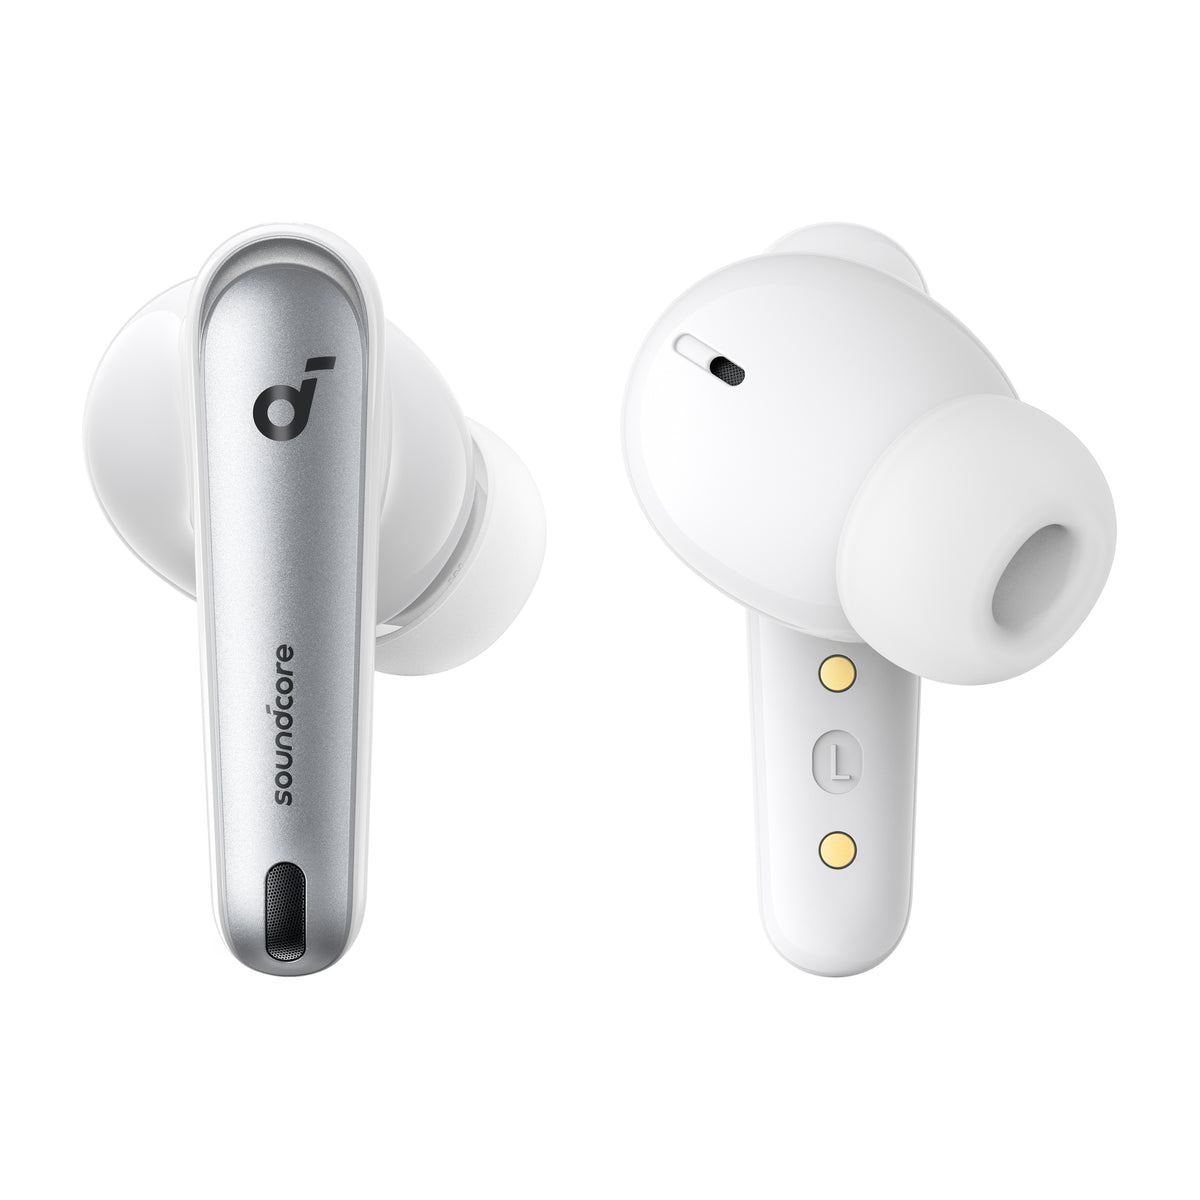 Liberty 4 NC - All-New True-Wireless Noise Canceling Earbuds - soundcore US  - soundcore CA